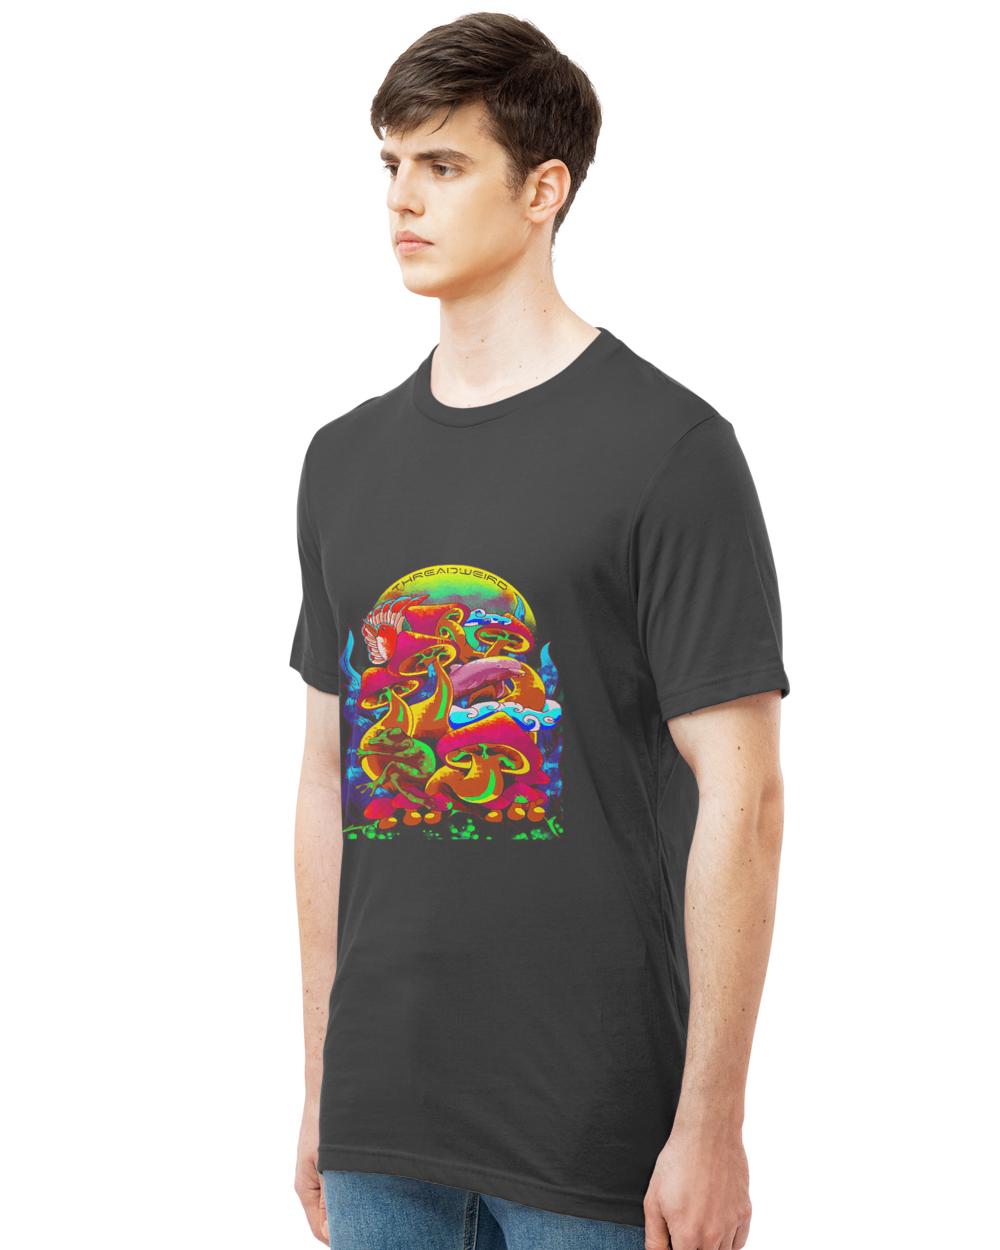 Psychedelic T- Shirt Psychedelic Dream T- Shirt